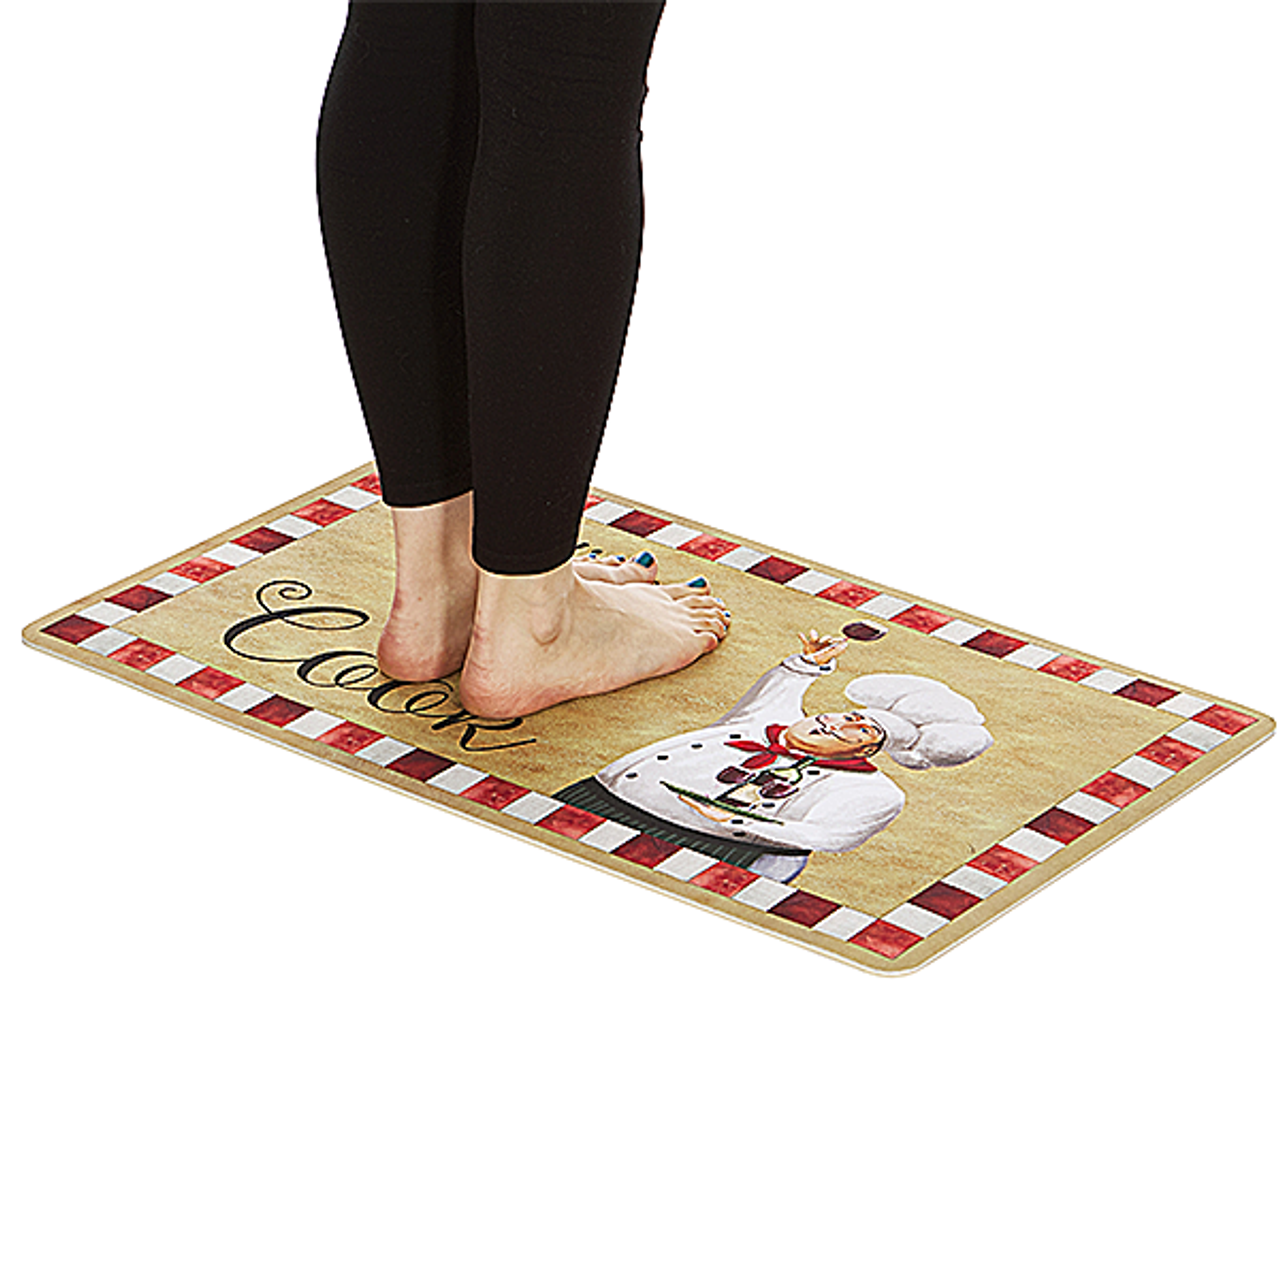 Anti-Fatigue Cushioned Kitchen Mat (2-Pack) product image